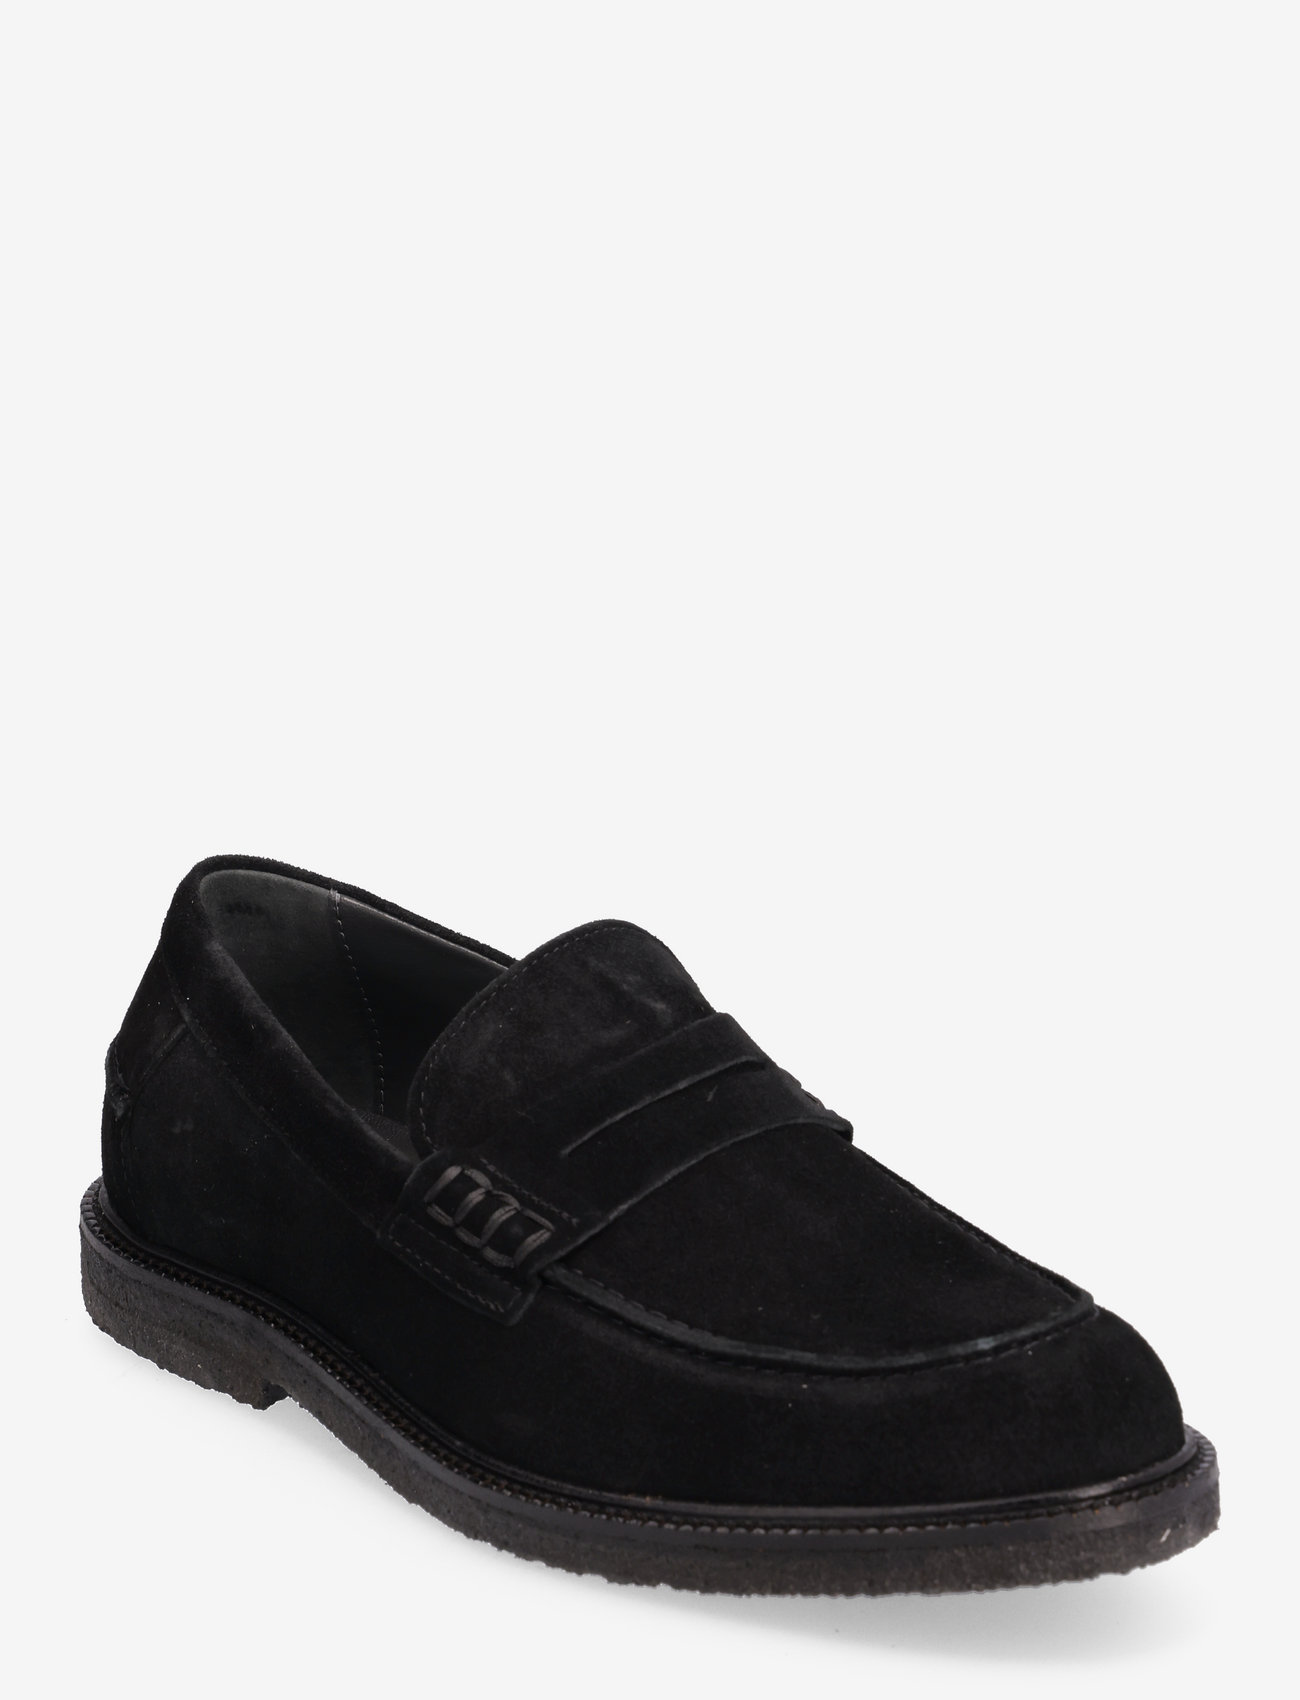 ANGULUS - Loafer - birthday gifts - 1163 black - 0